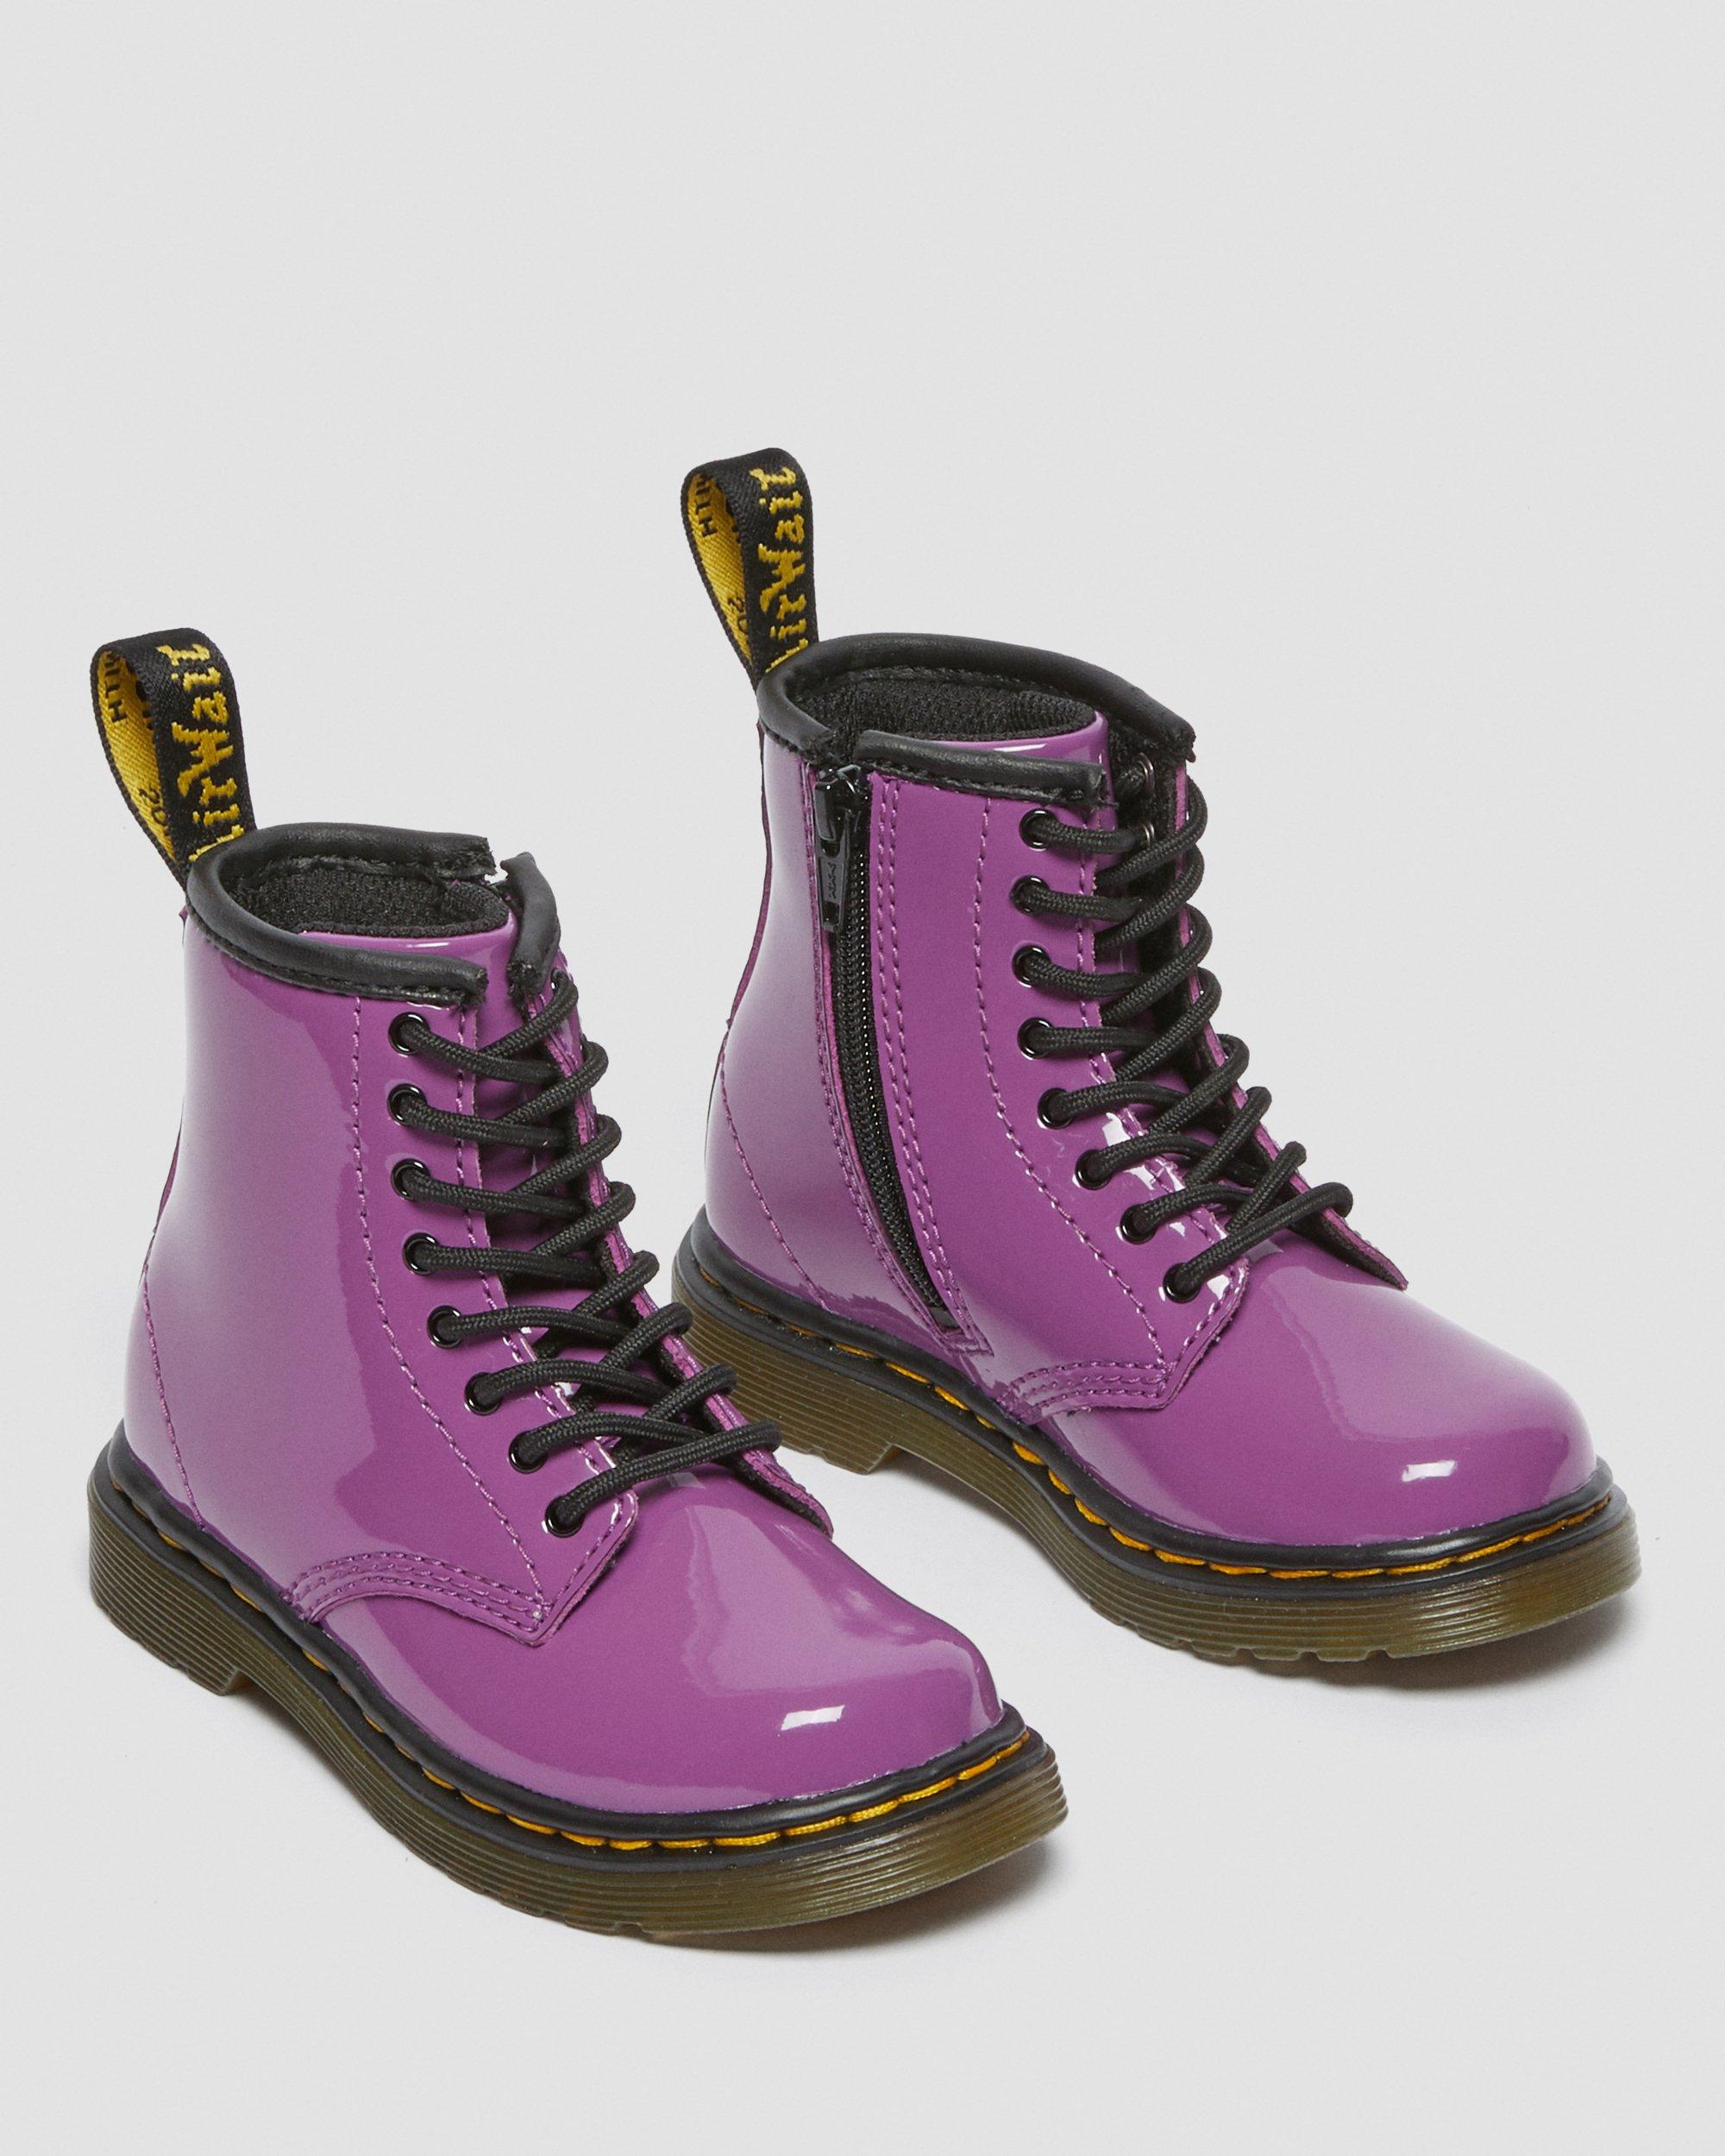 Toddler 1460 Patent Leather Lace Up Boots in Purple